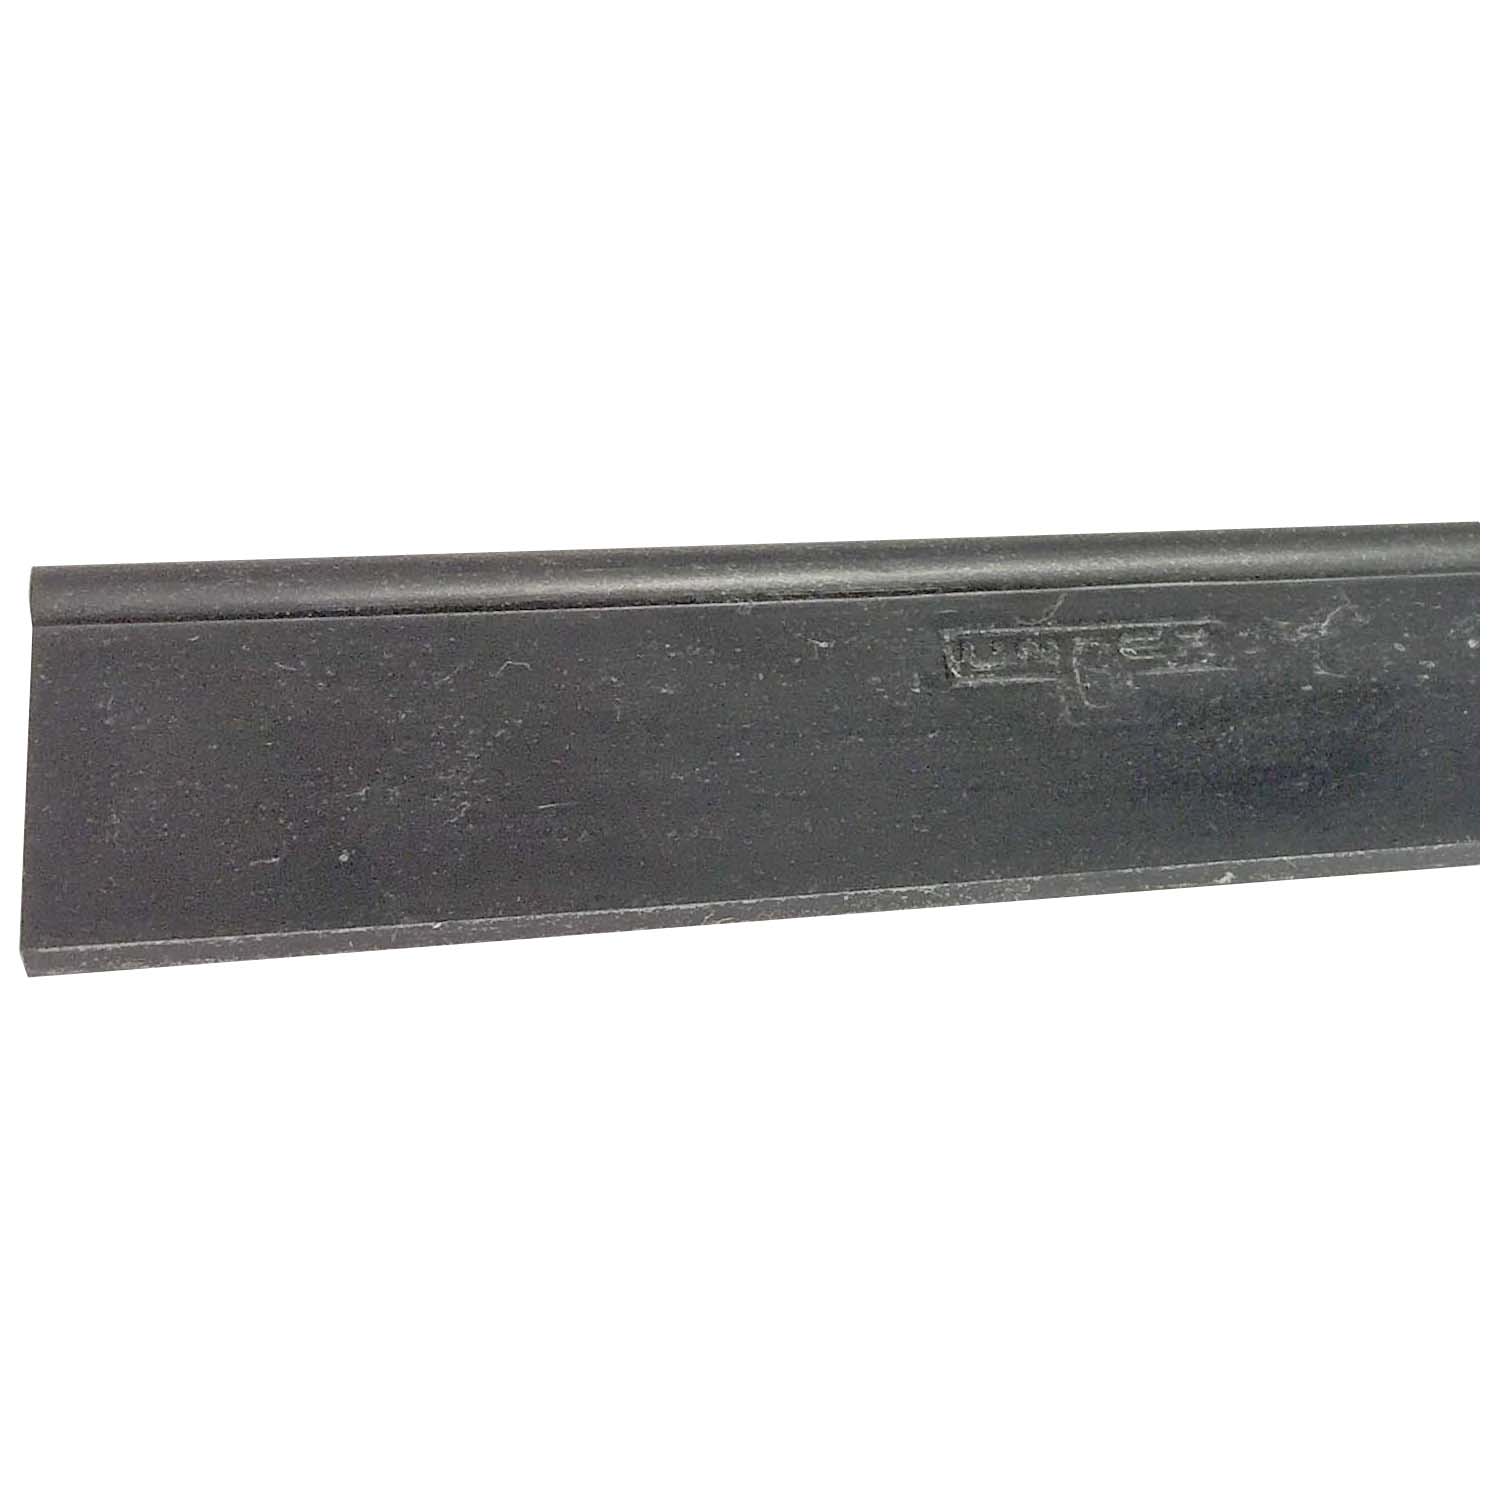 Unger-22-inch-Soft-Rubber